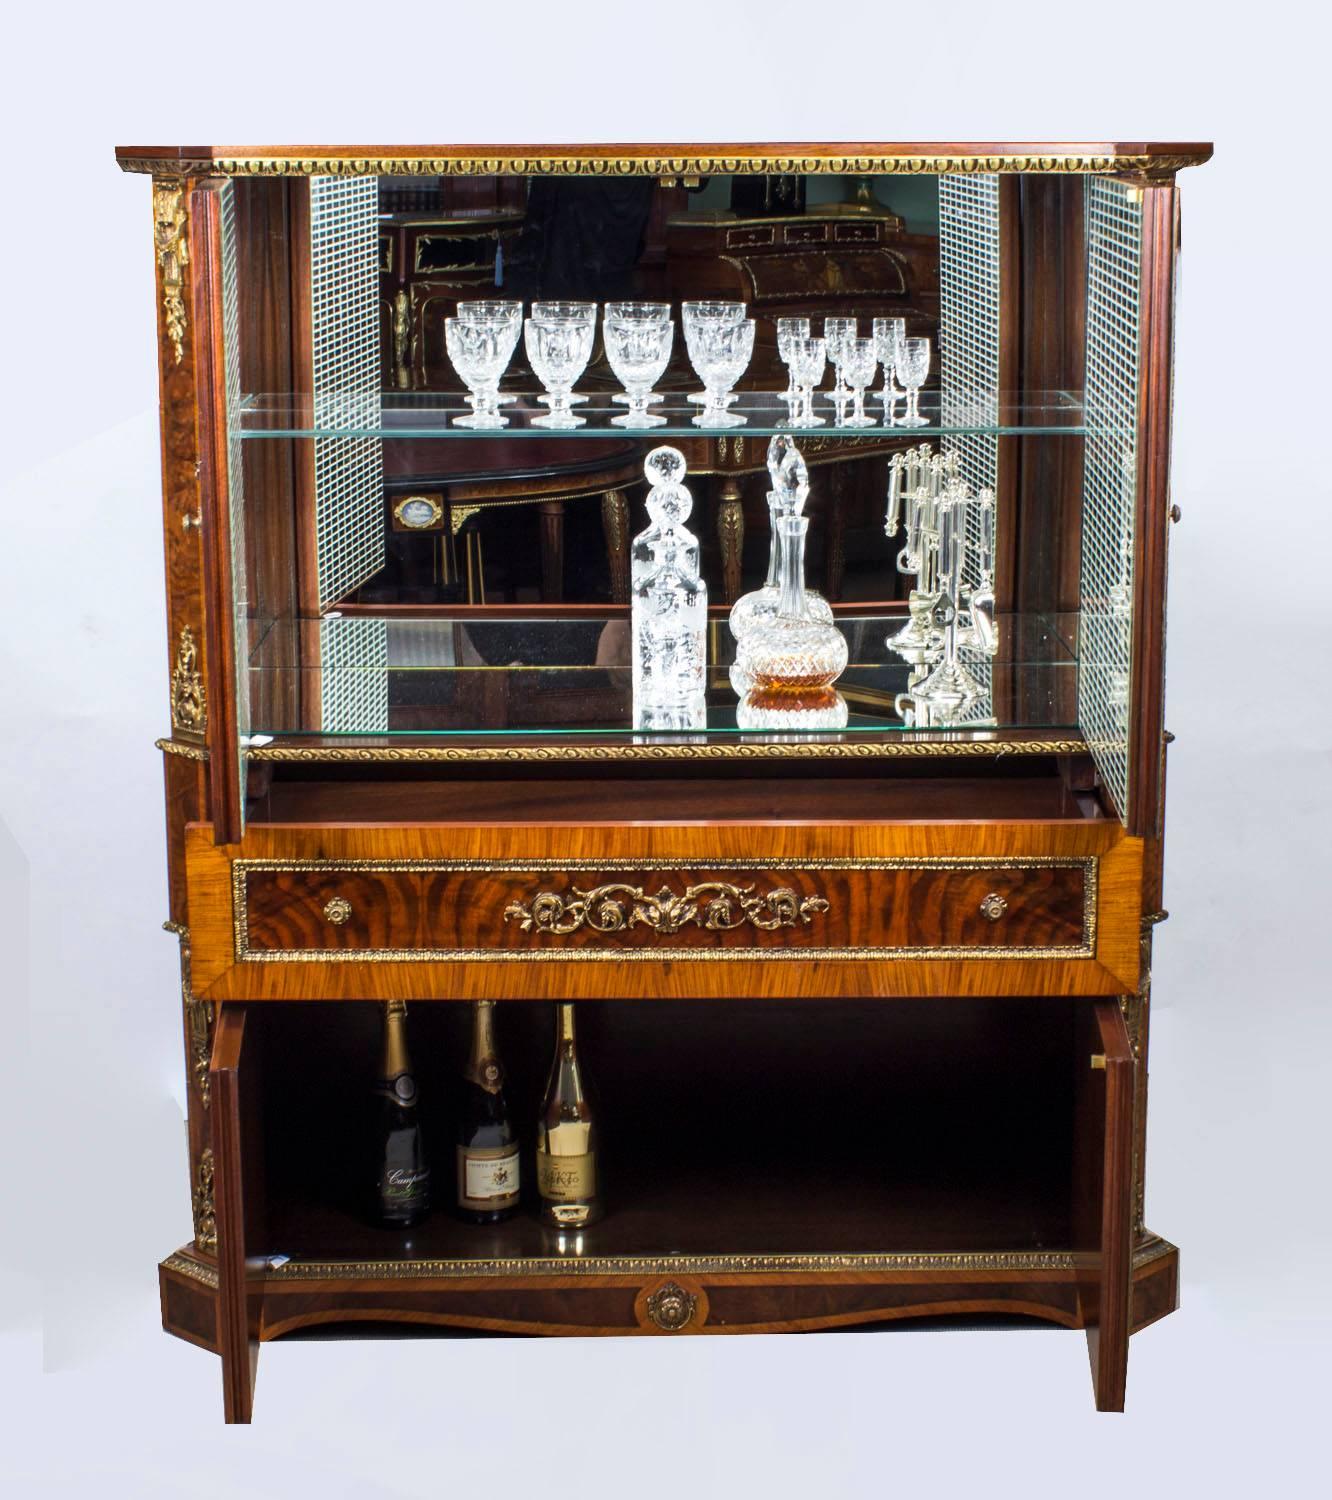 This is a superb large French Louis revival burr walnut and kingwood ormolu-mounted cocktail cabinet, mid-20th century in date. 

Adding to its truly unique character it has been decorated with a plethora of exquisite gilded ormolu mounts.

The